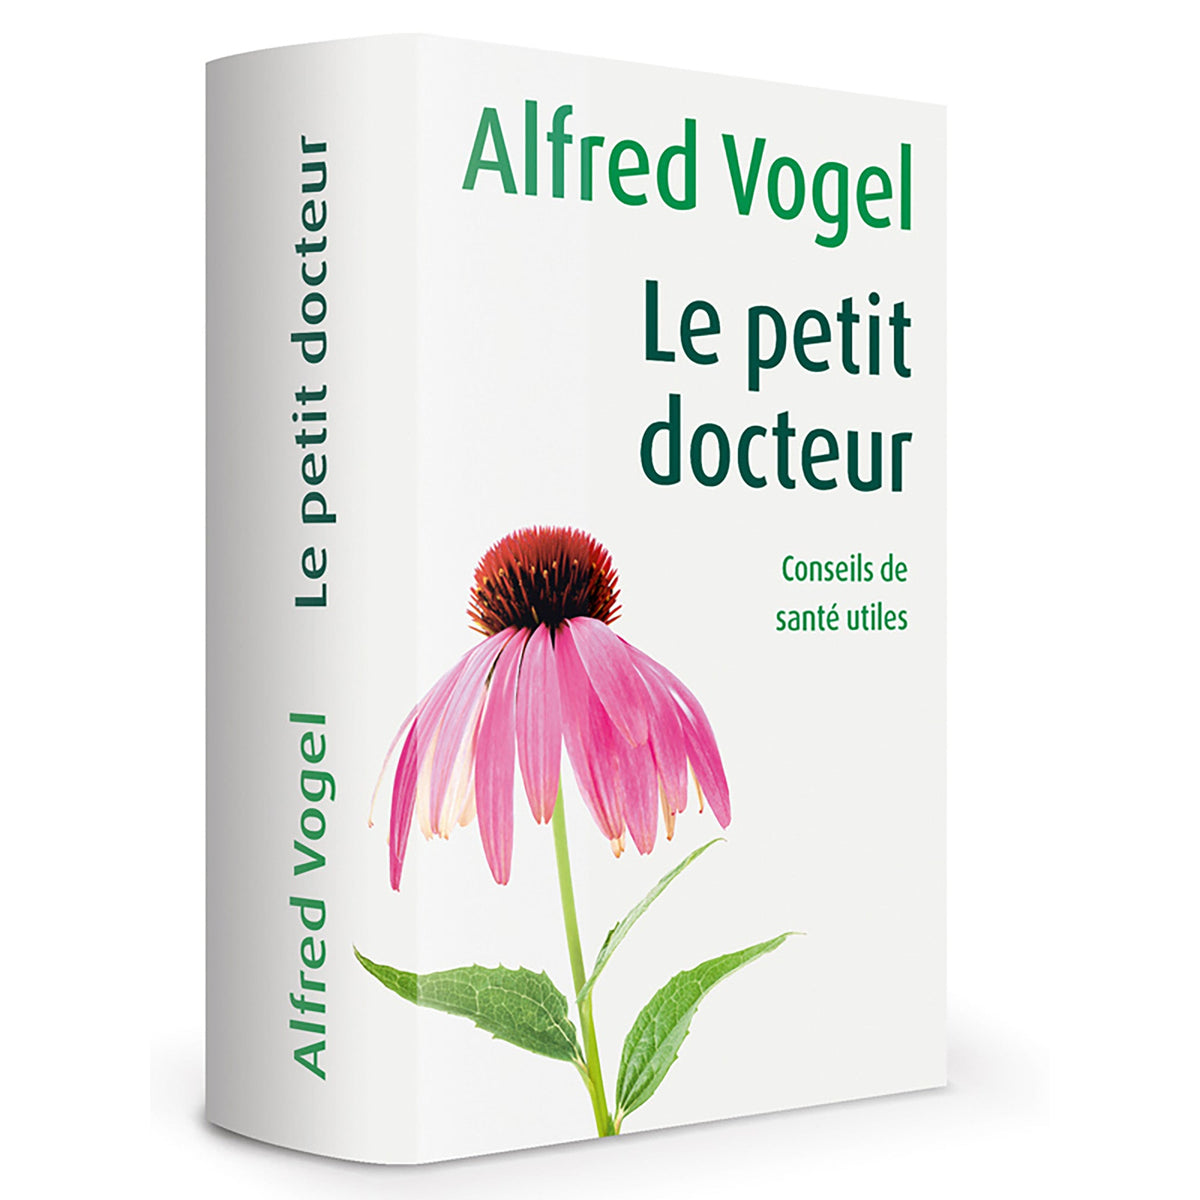 The Nature Doctor - Complete Guide on Natural Health - French Edition - A.Vogel Canada